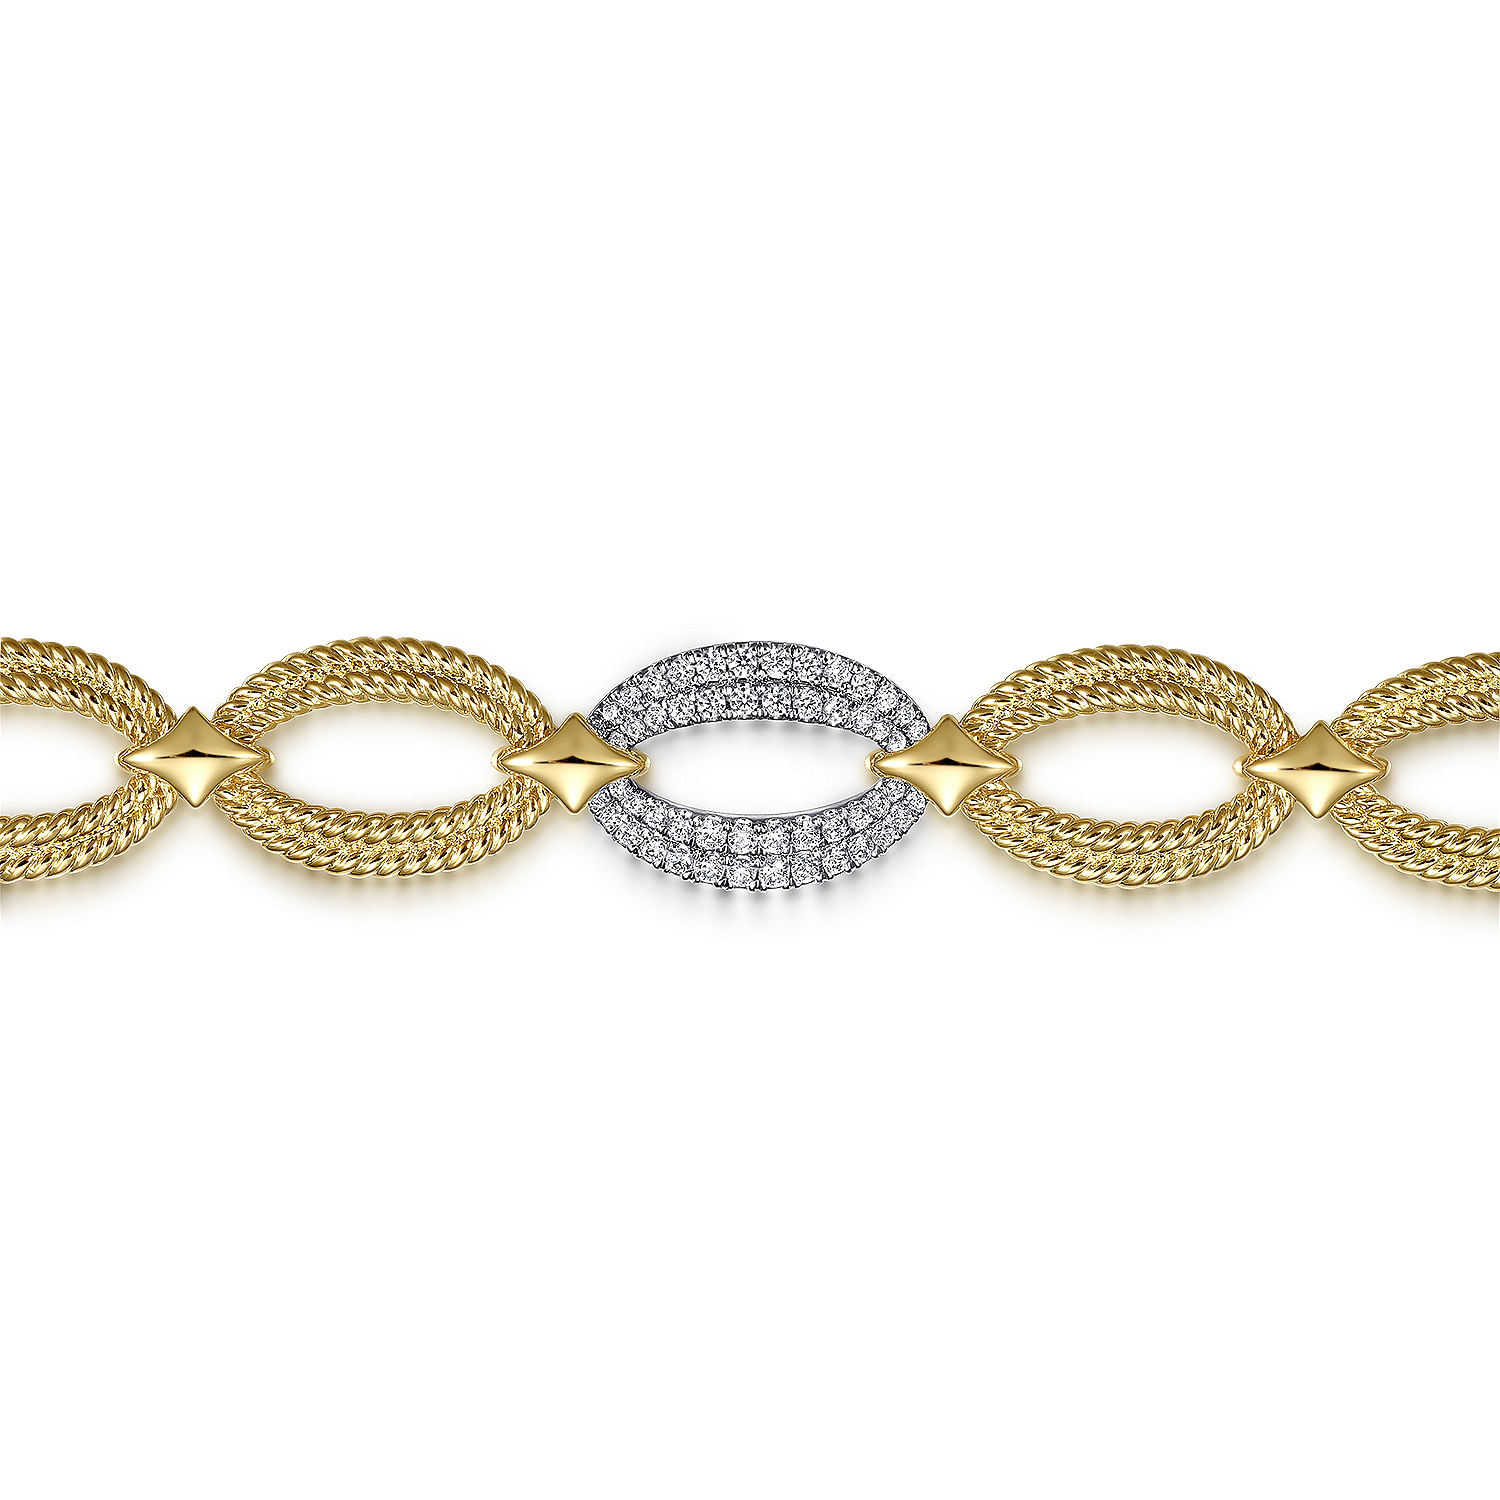 14K-White-and-Yellow-Gold-Diamond-Rope-Link-Chain-Bracelet2